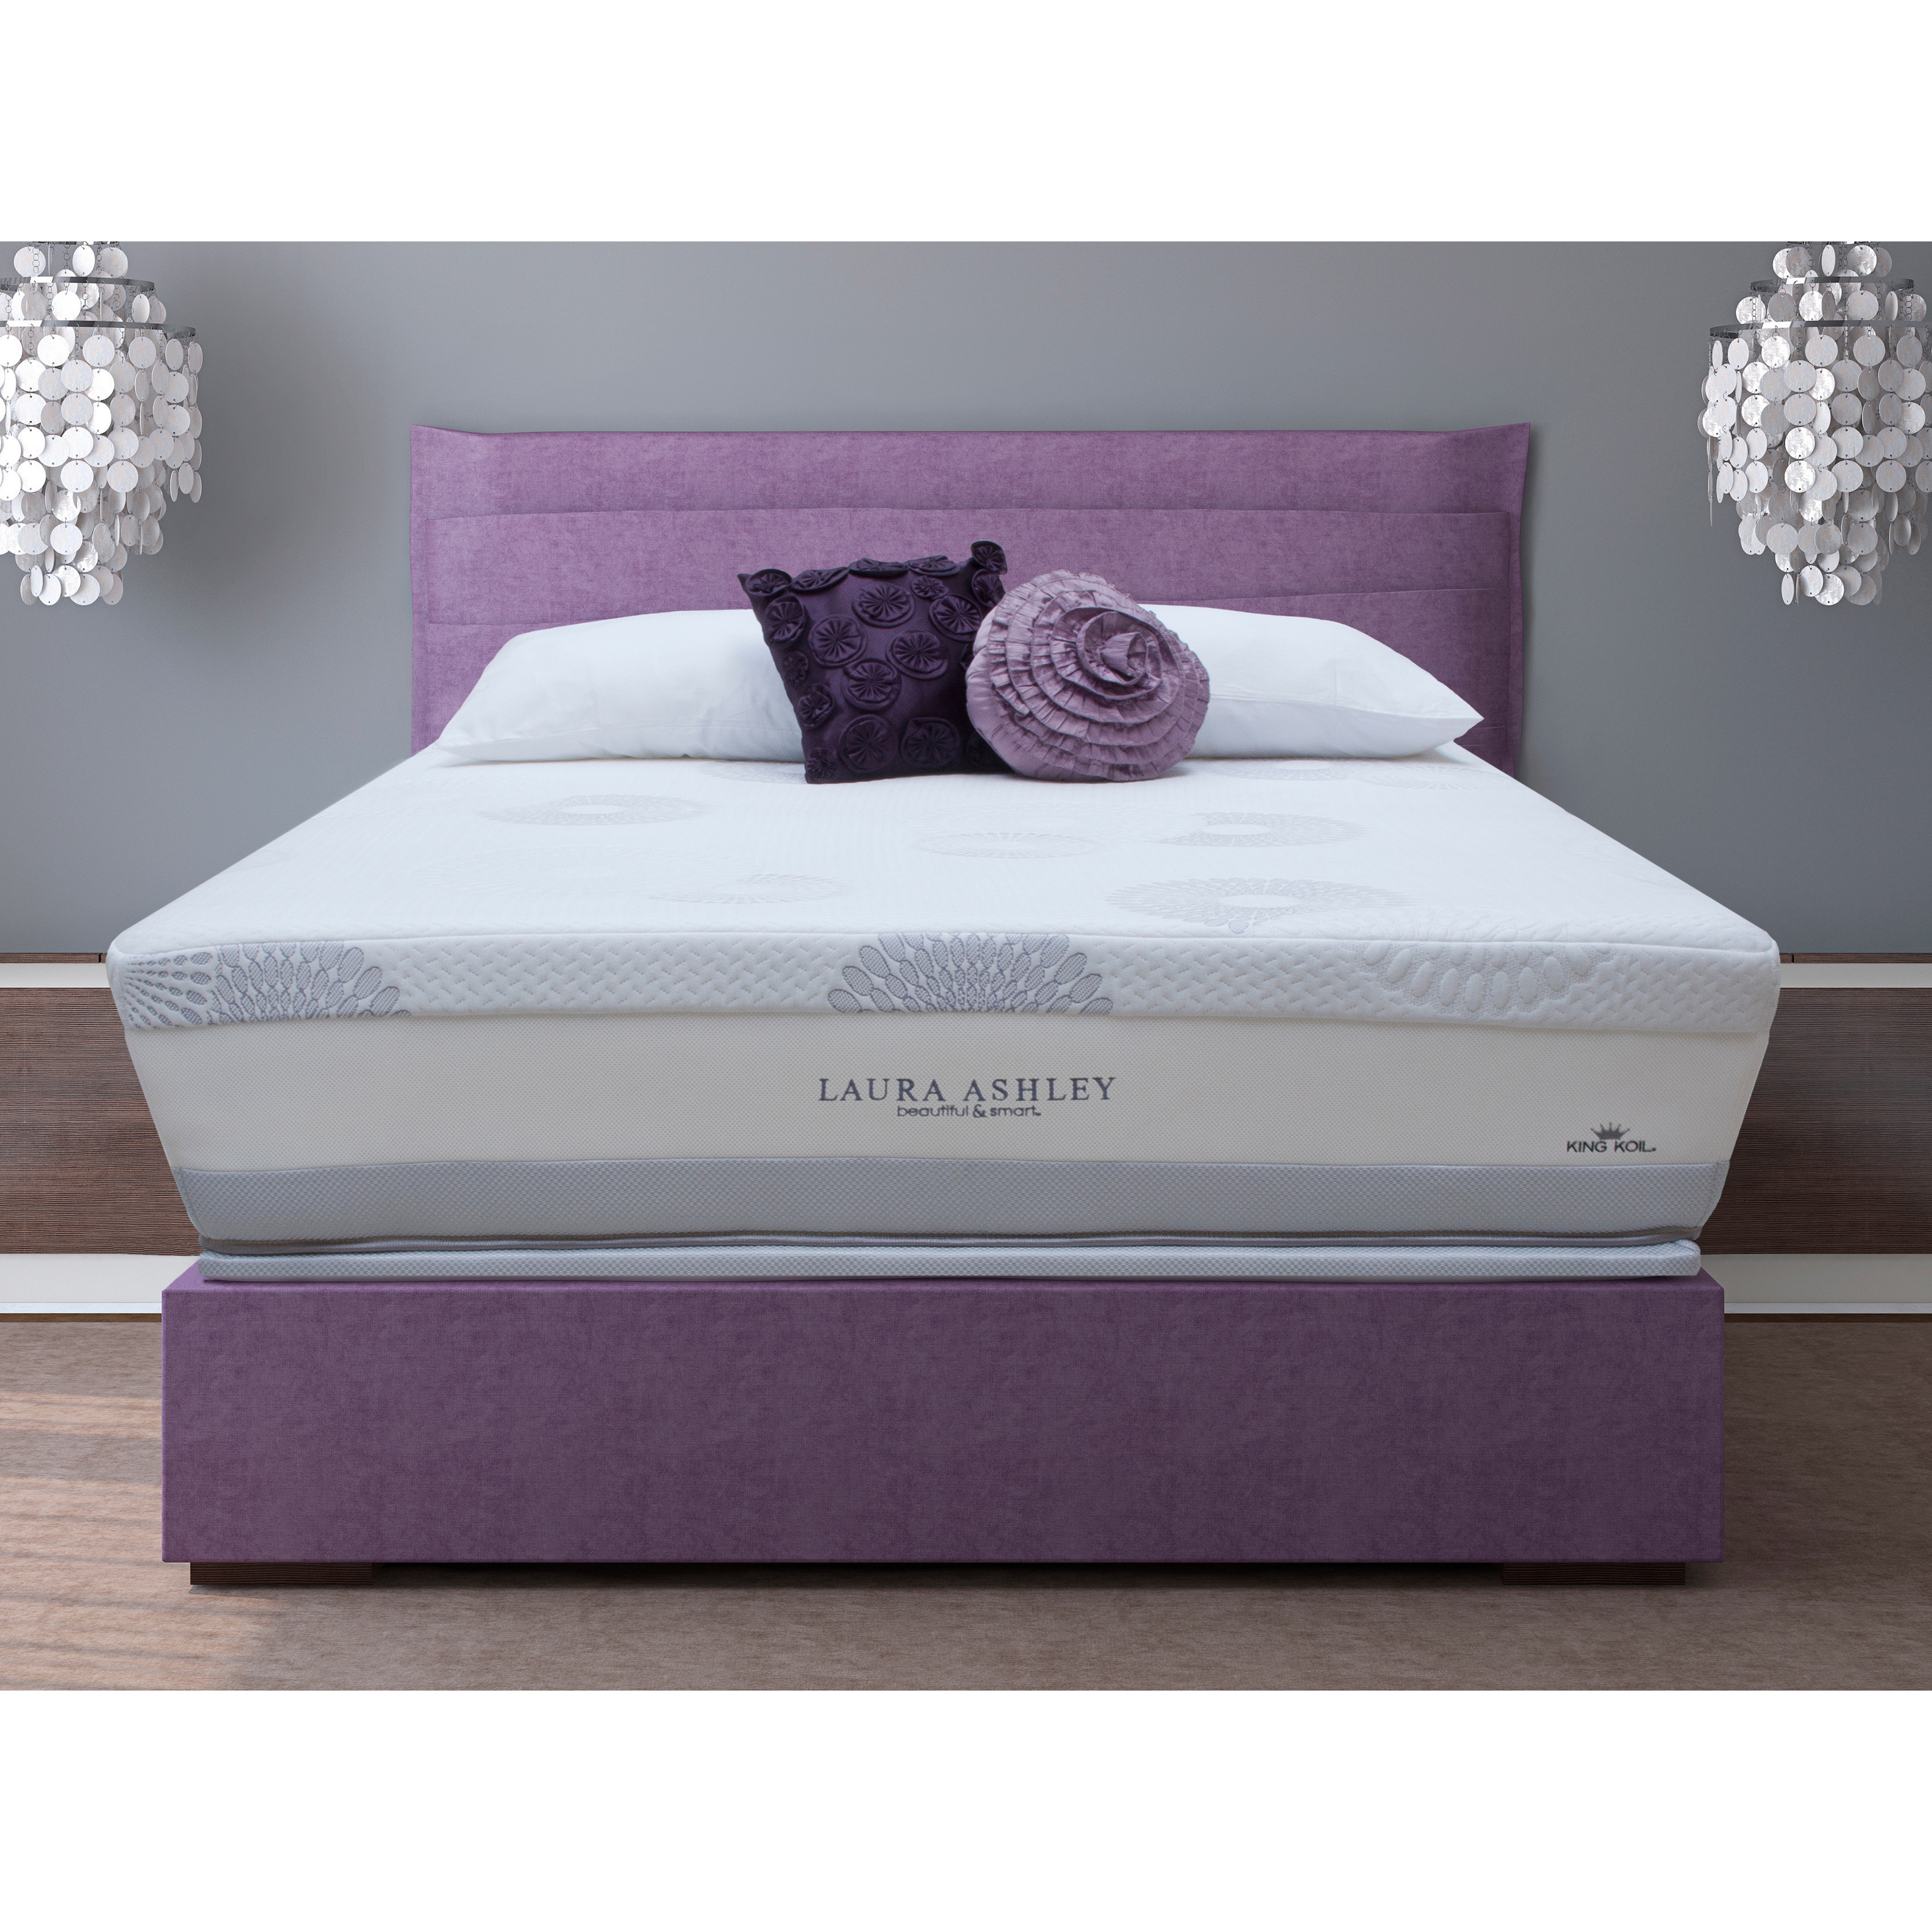 Laura Ashley Blossom Plush Super Size Twin size Mattress And Foundation Set (TwinSet includes Mattress and foundationSupport Contour plus encased coil system   638 individually encased coils (queen coil density) reduce motion transfer to eliminate partn